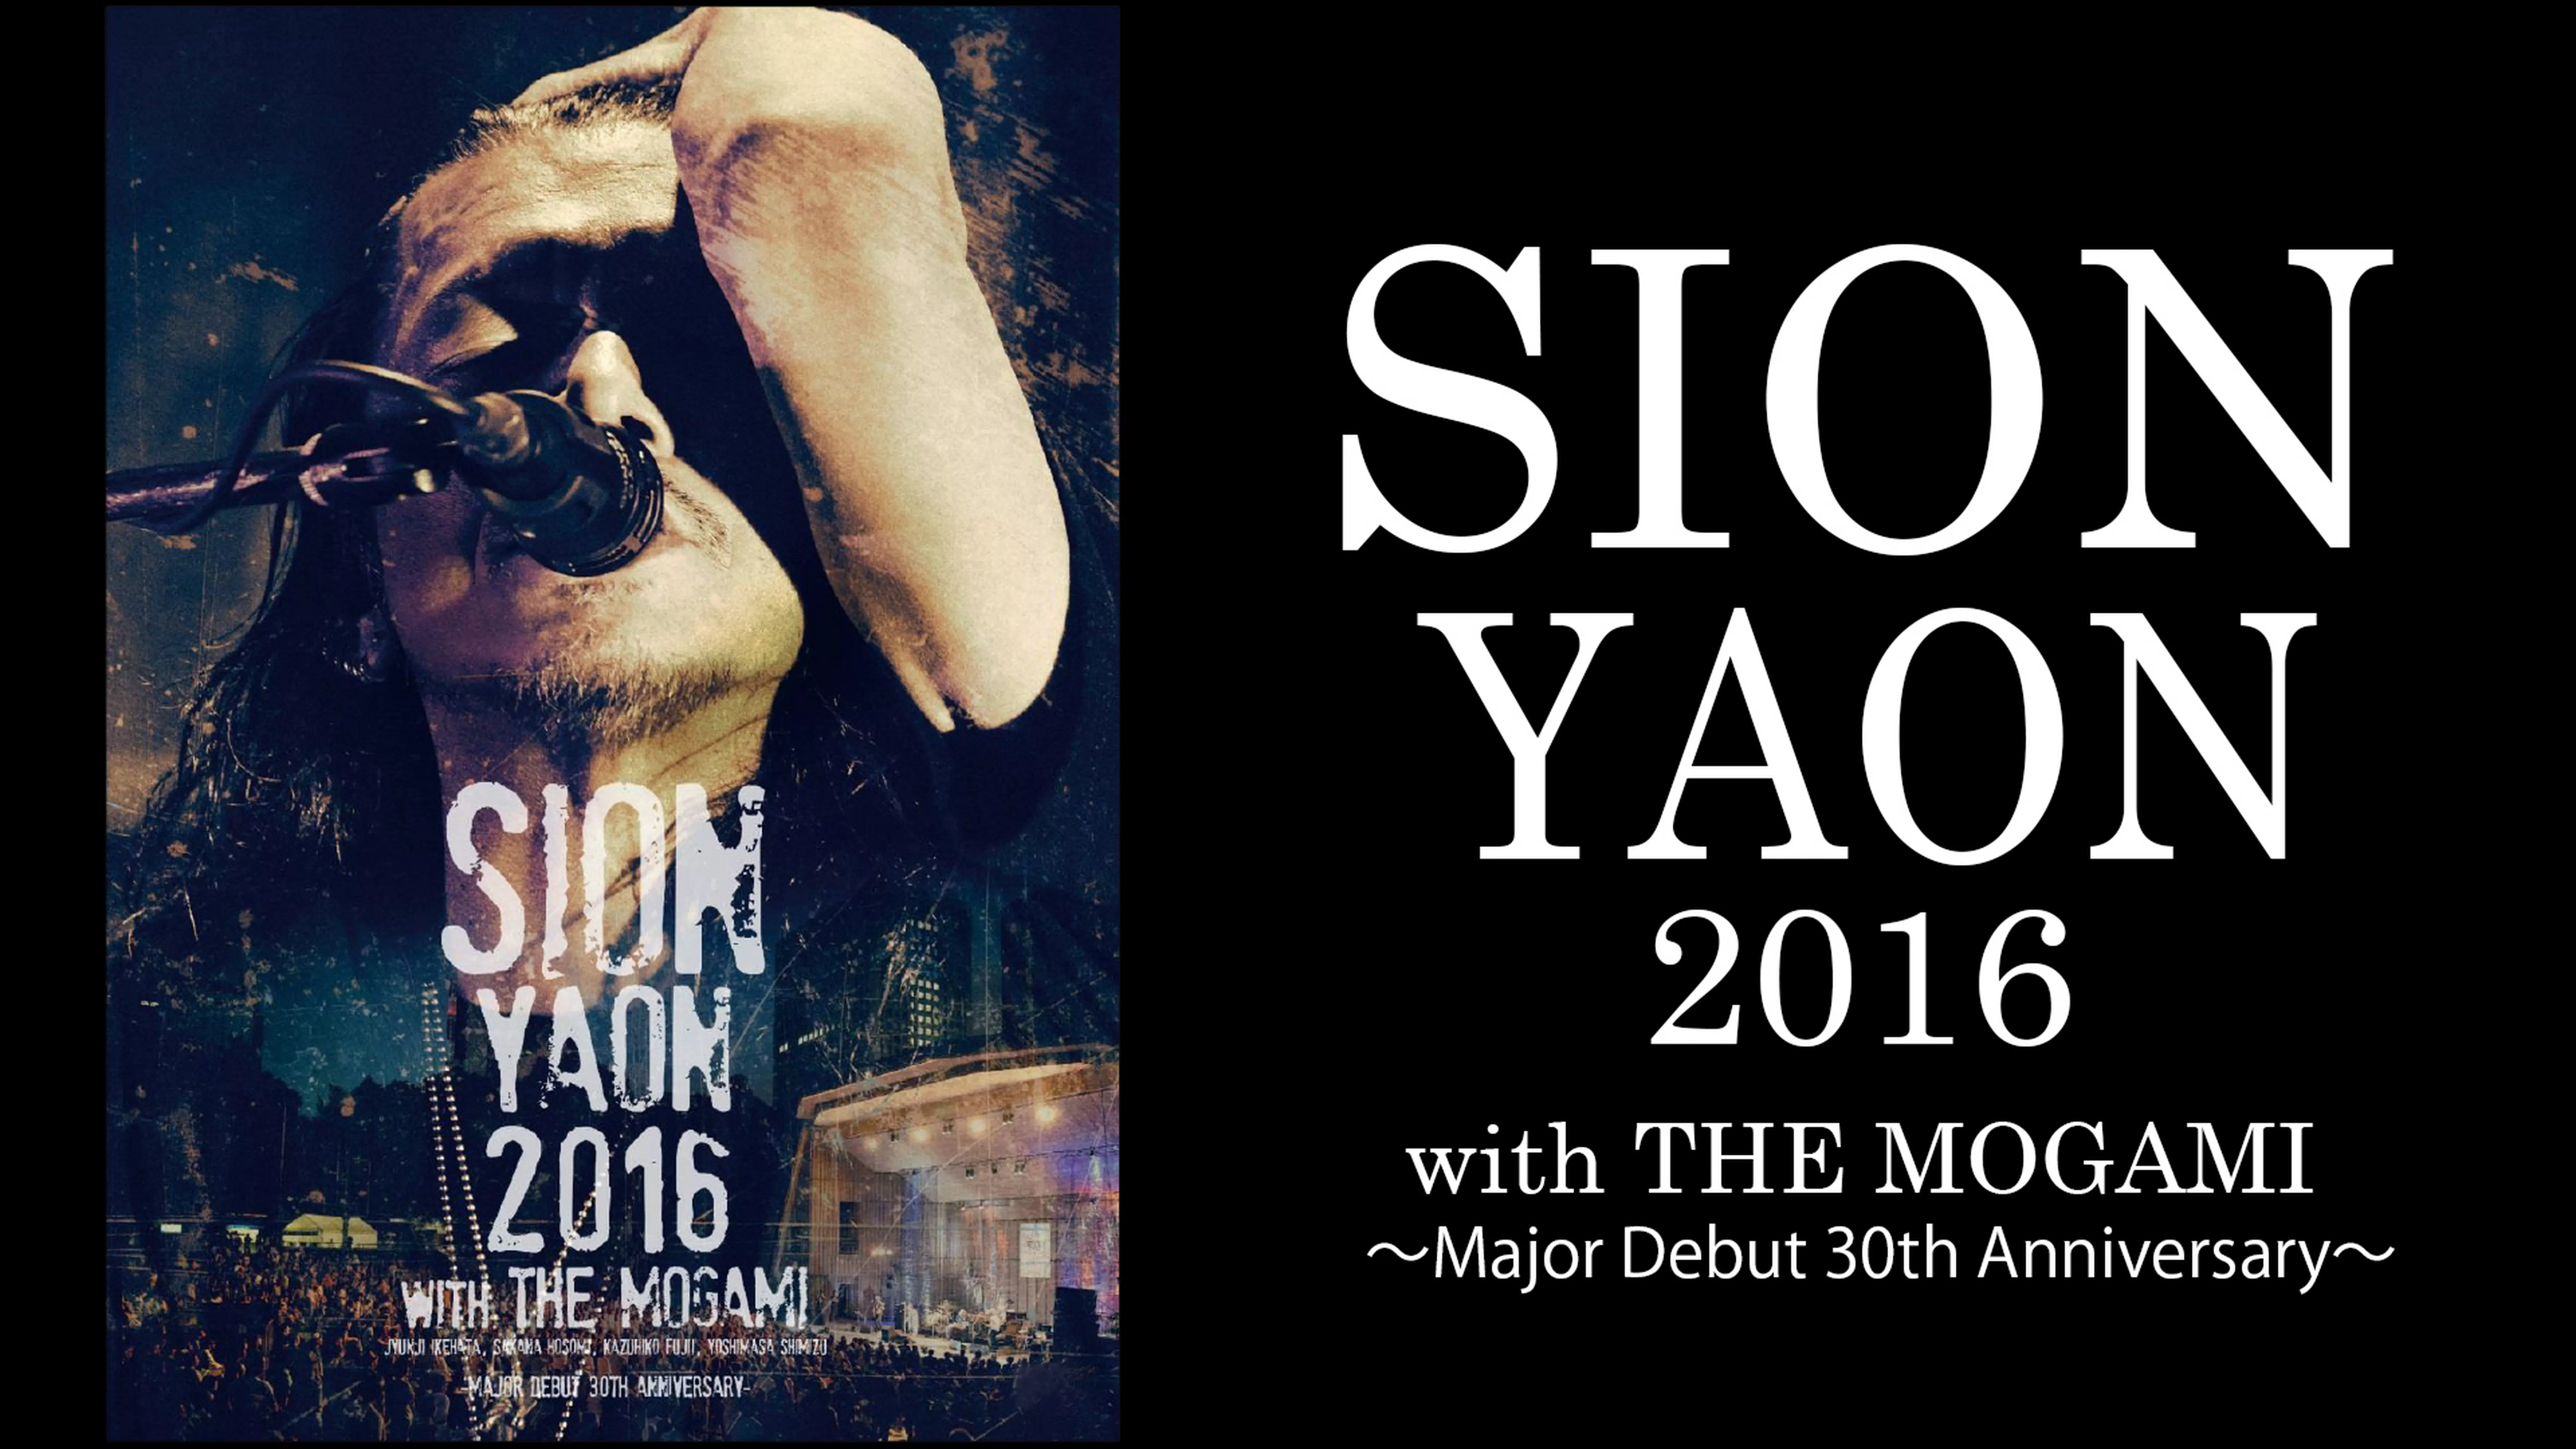 SION-YAON 2016 with THE MOGAMI ～Major Debut 30th Anniversary